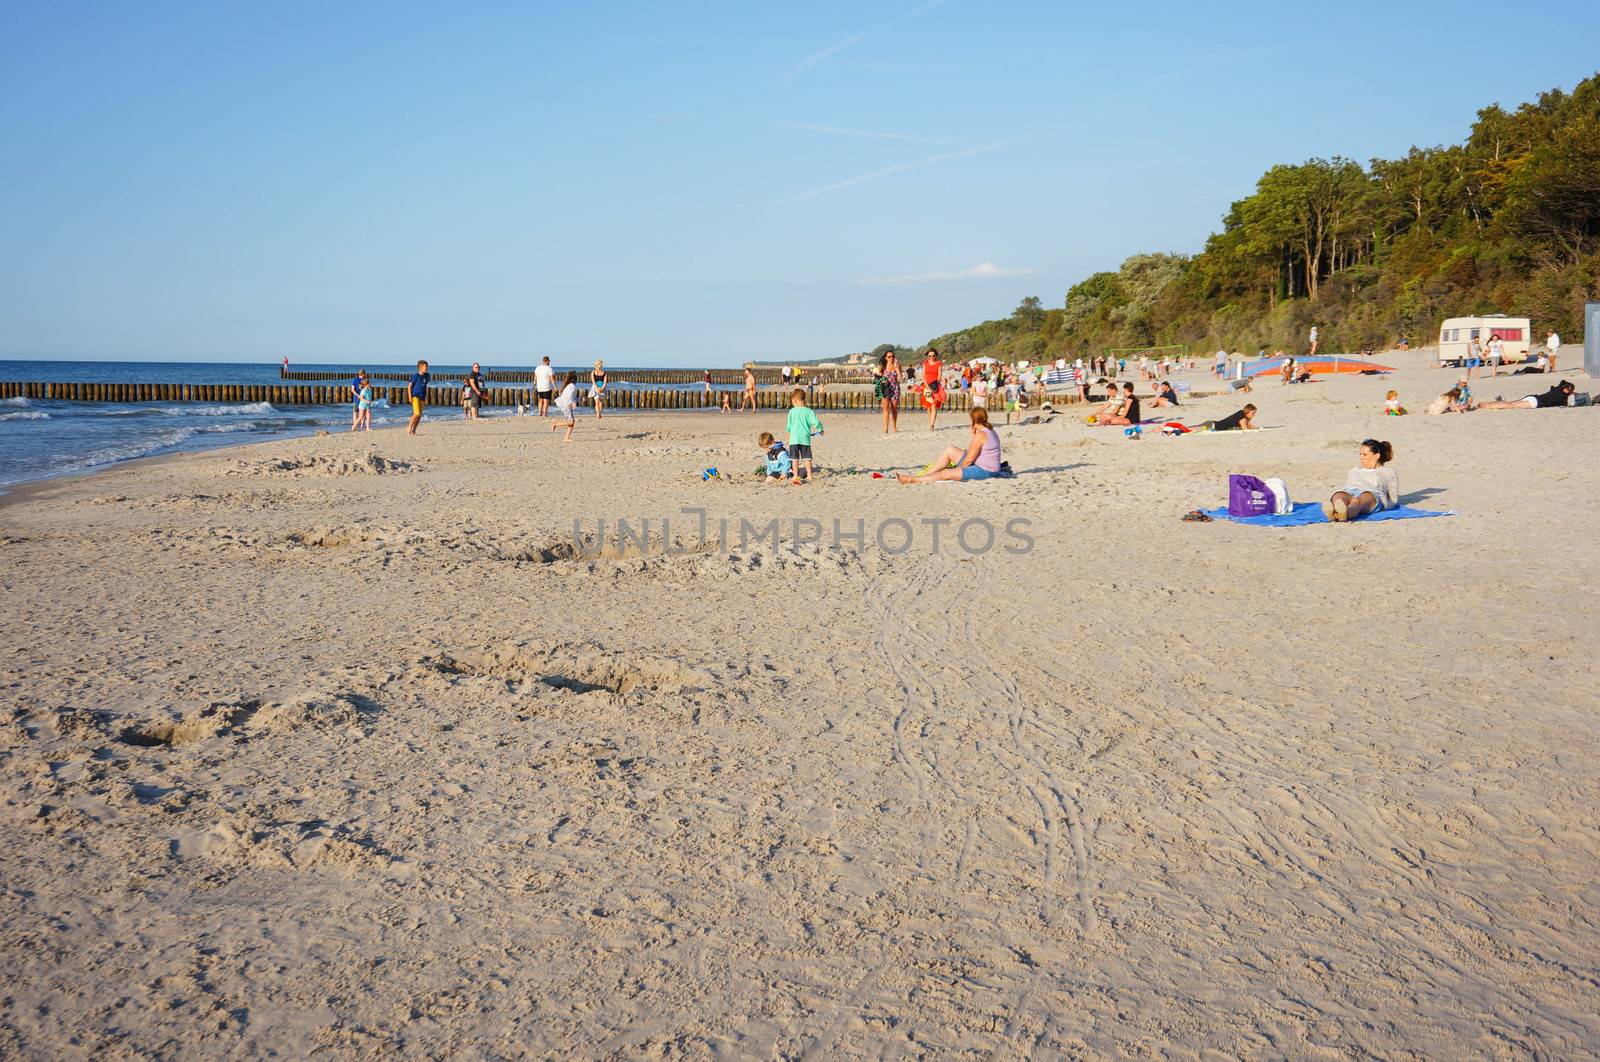 SIANOZETY, POLAND - JULY 18, 2015: Sand and people at a beach with forest 